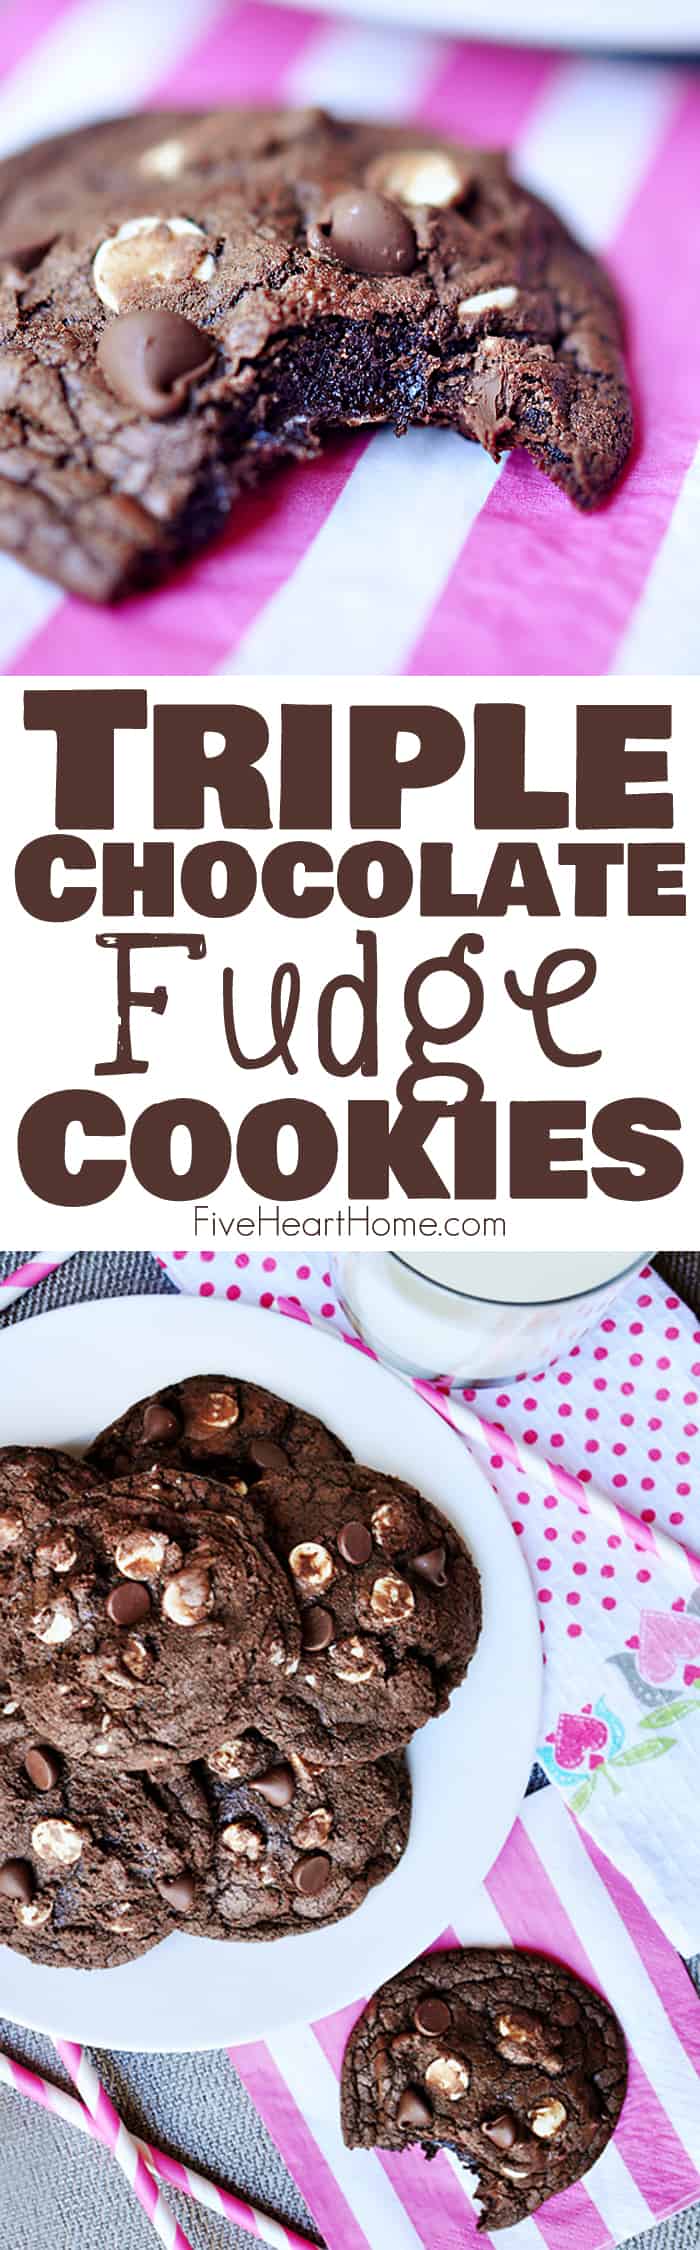 Triple Chocolate Fudge Cookies Collage with Text Overlay 